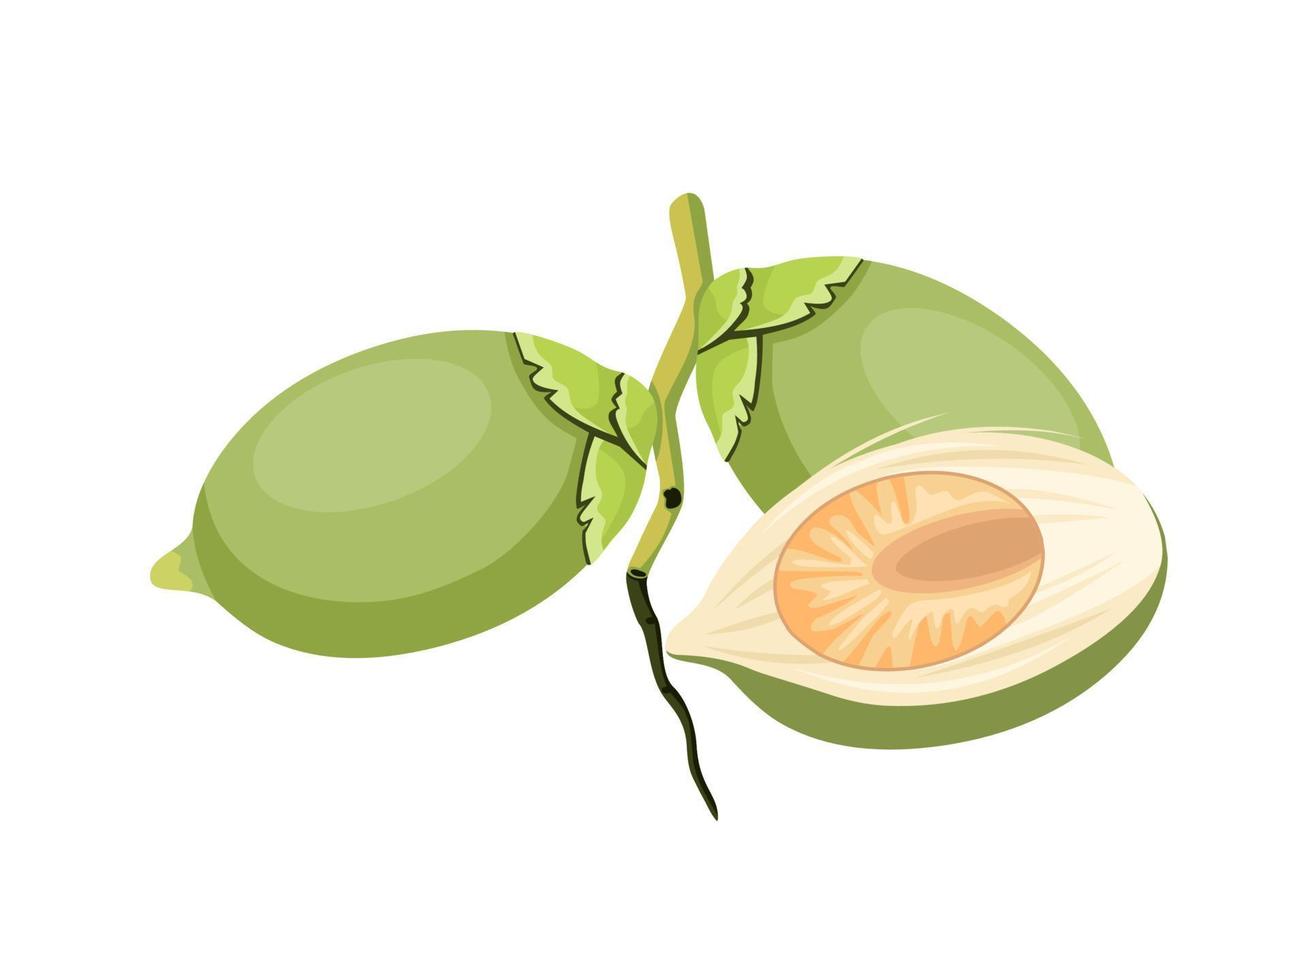 Vector illustration, green betel nut, also known as areca nut, scientific name Areca catechu, isolated on a white background.